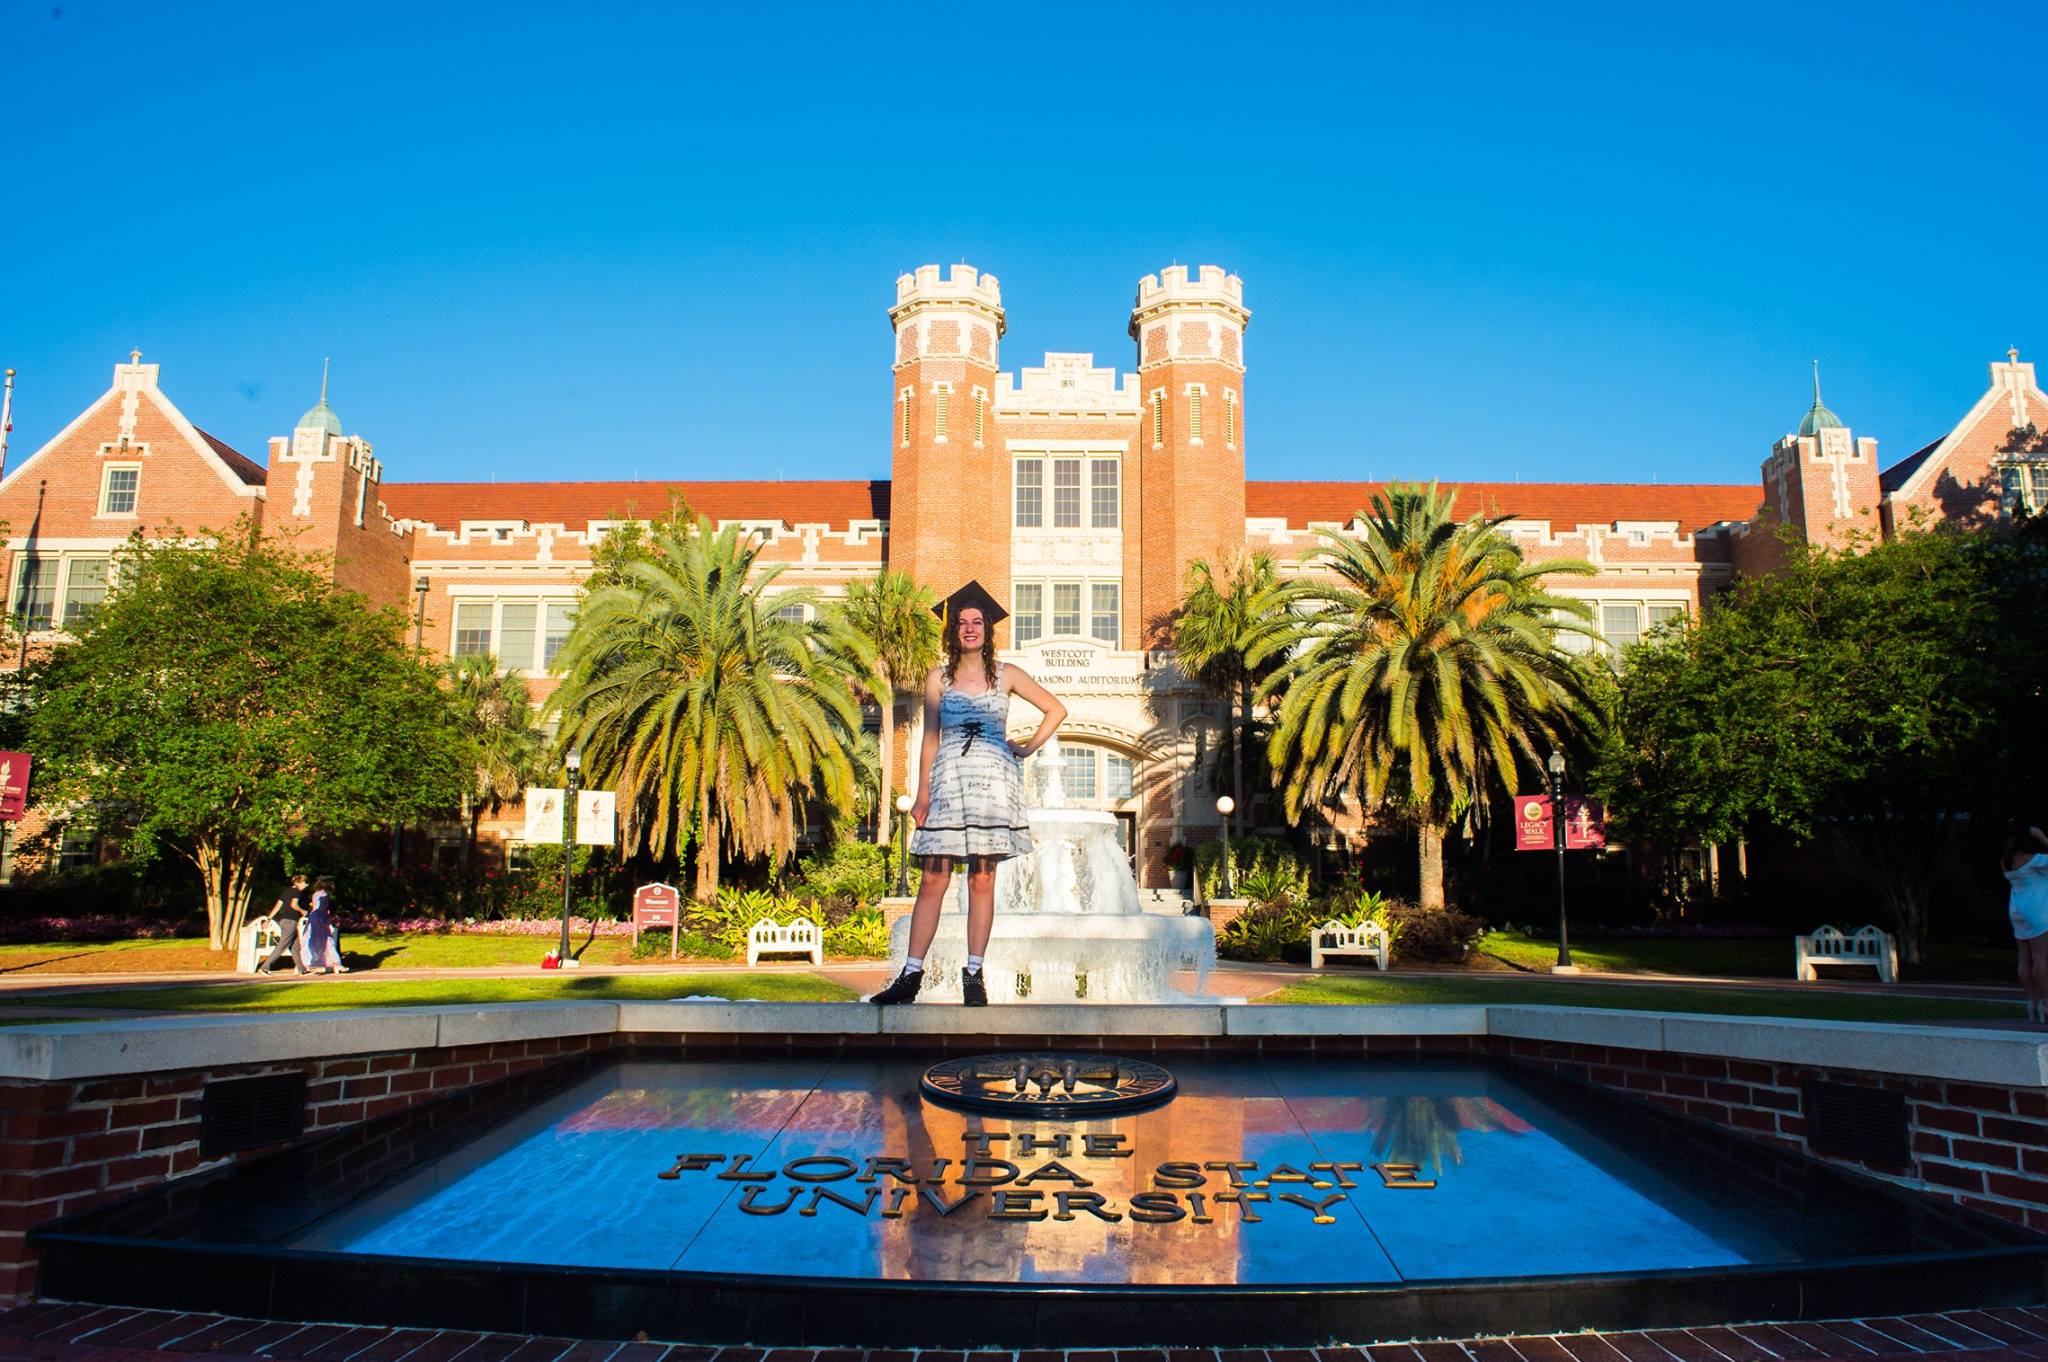 Leah standing in front of Wescott Fountain at FSU